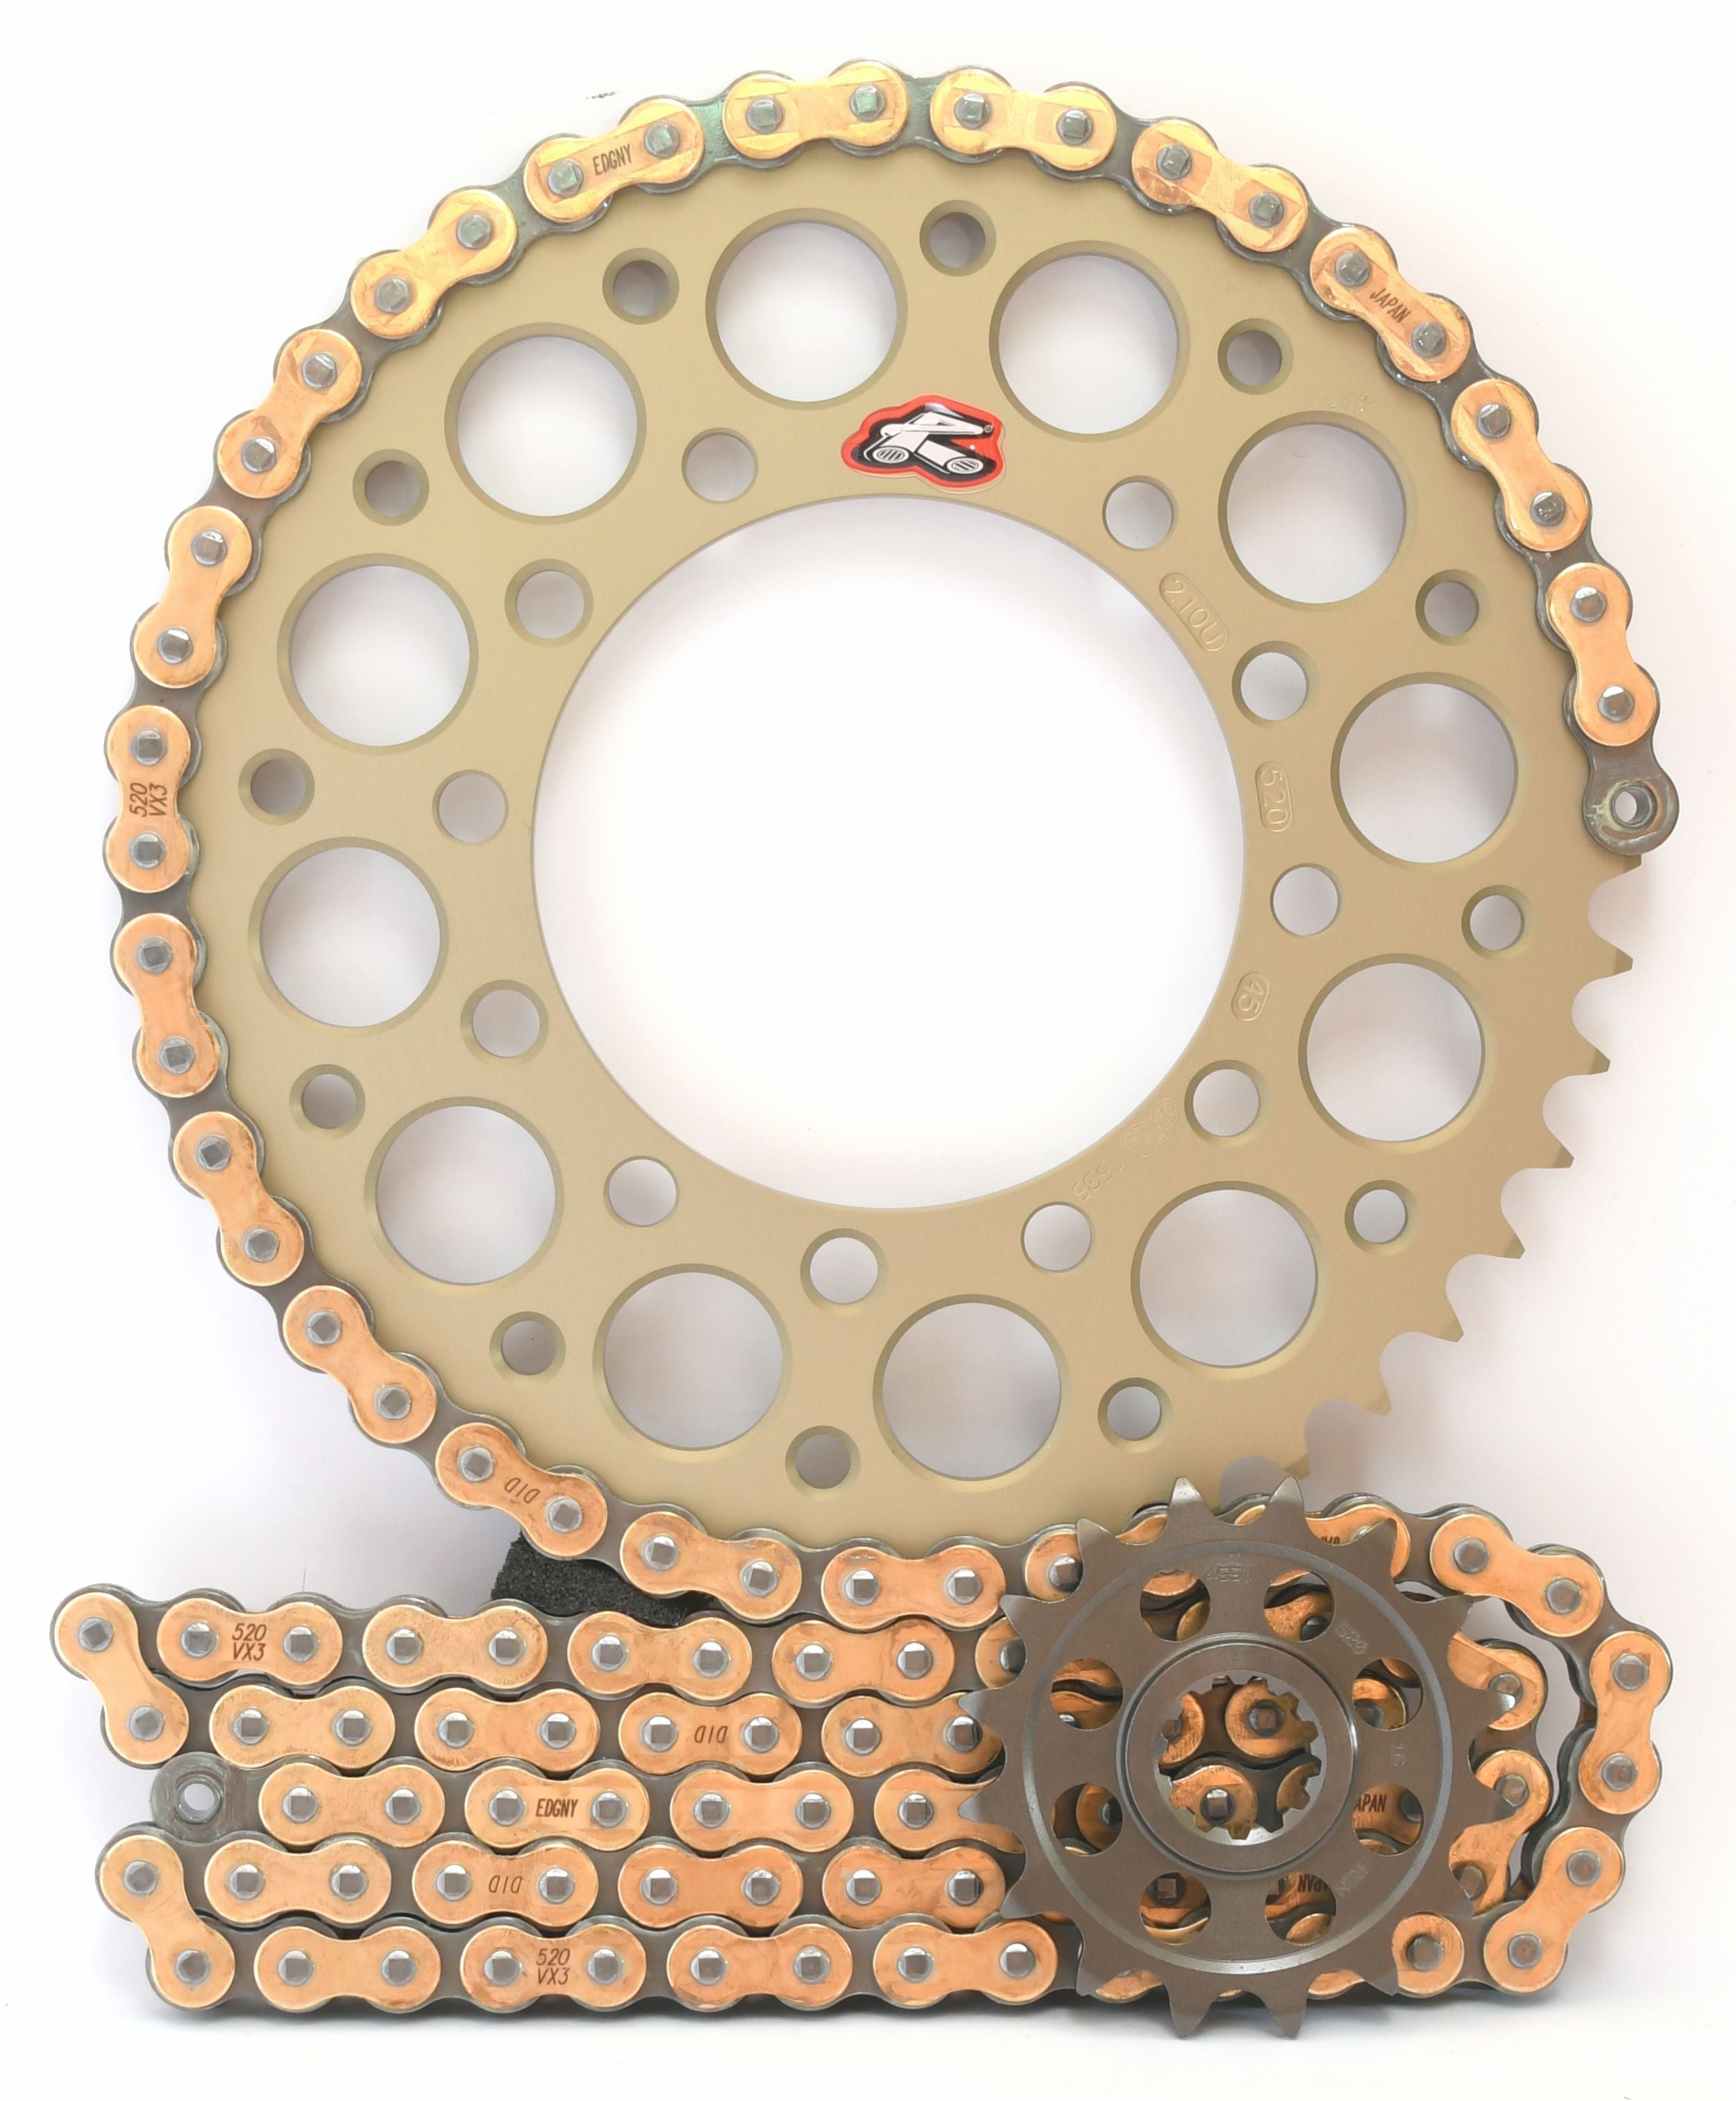 Renthal Ultralight and DID Chain & Sprocket Kit 520 Conversion for GSX-R750 2011-2018 - Standard Gearing